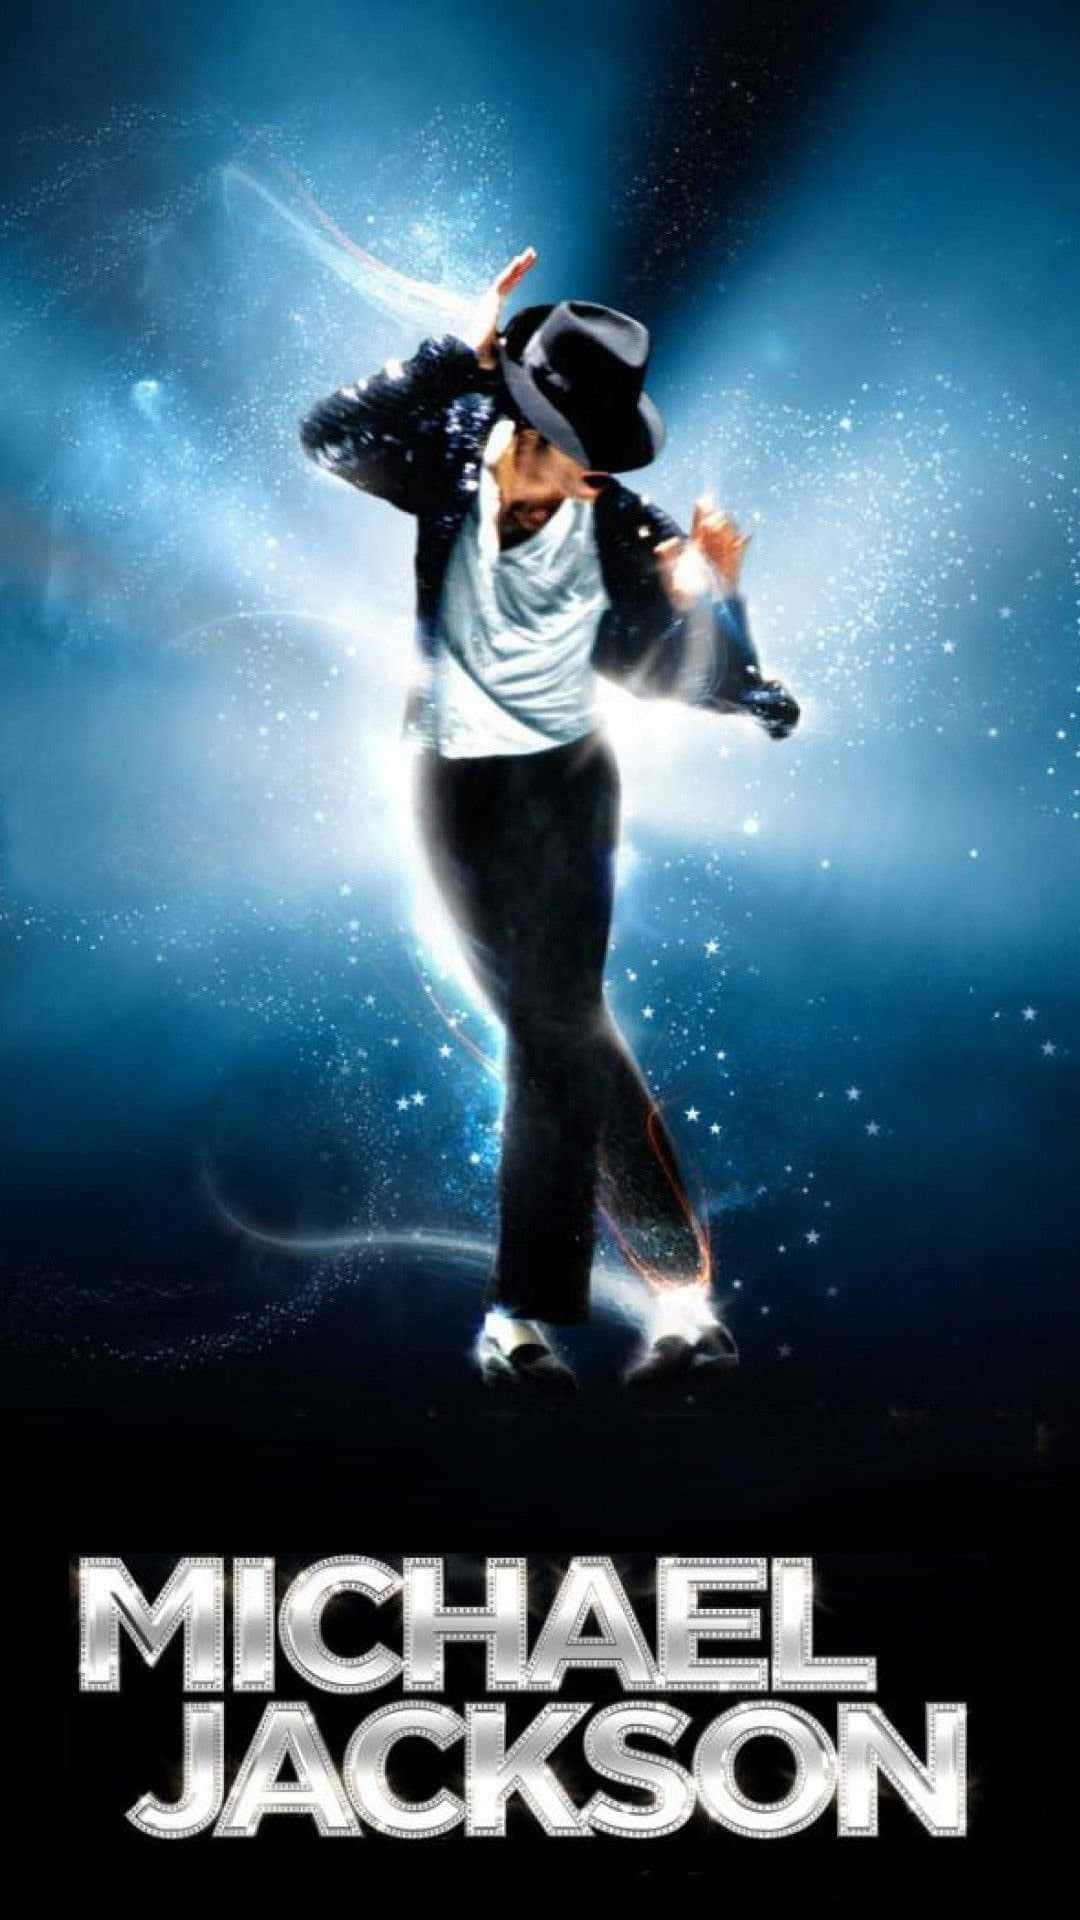 Step-By-Step Instructions for 6 Michael Jackson Dance Moves | LoveToKnow